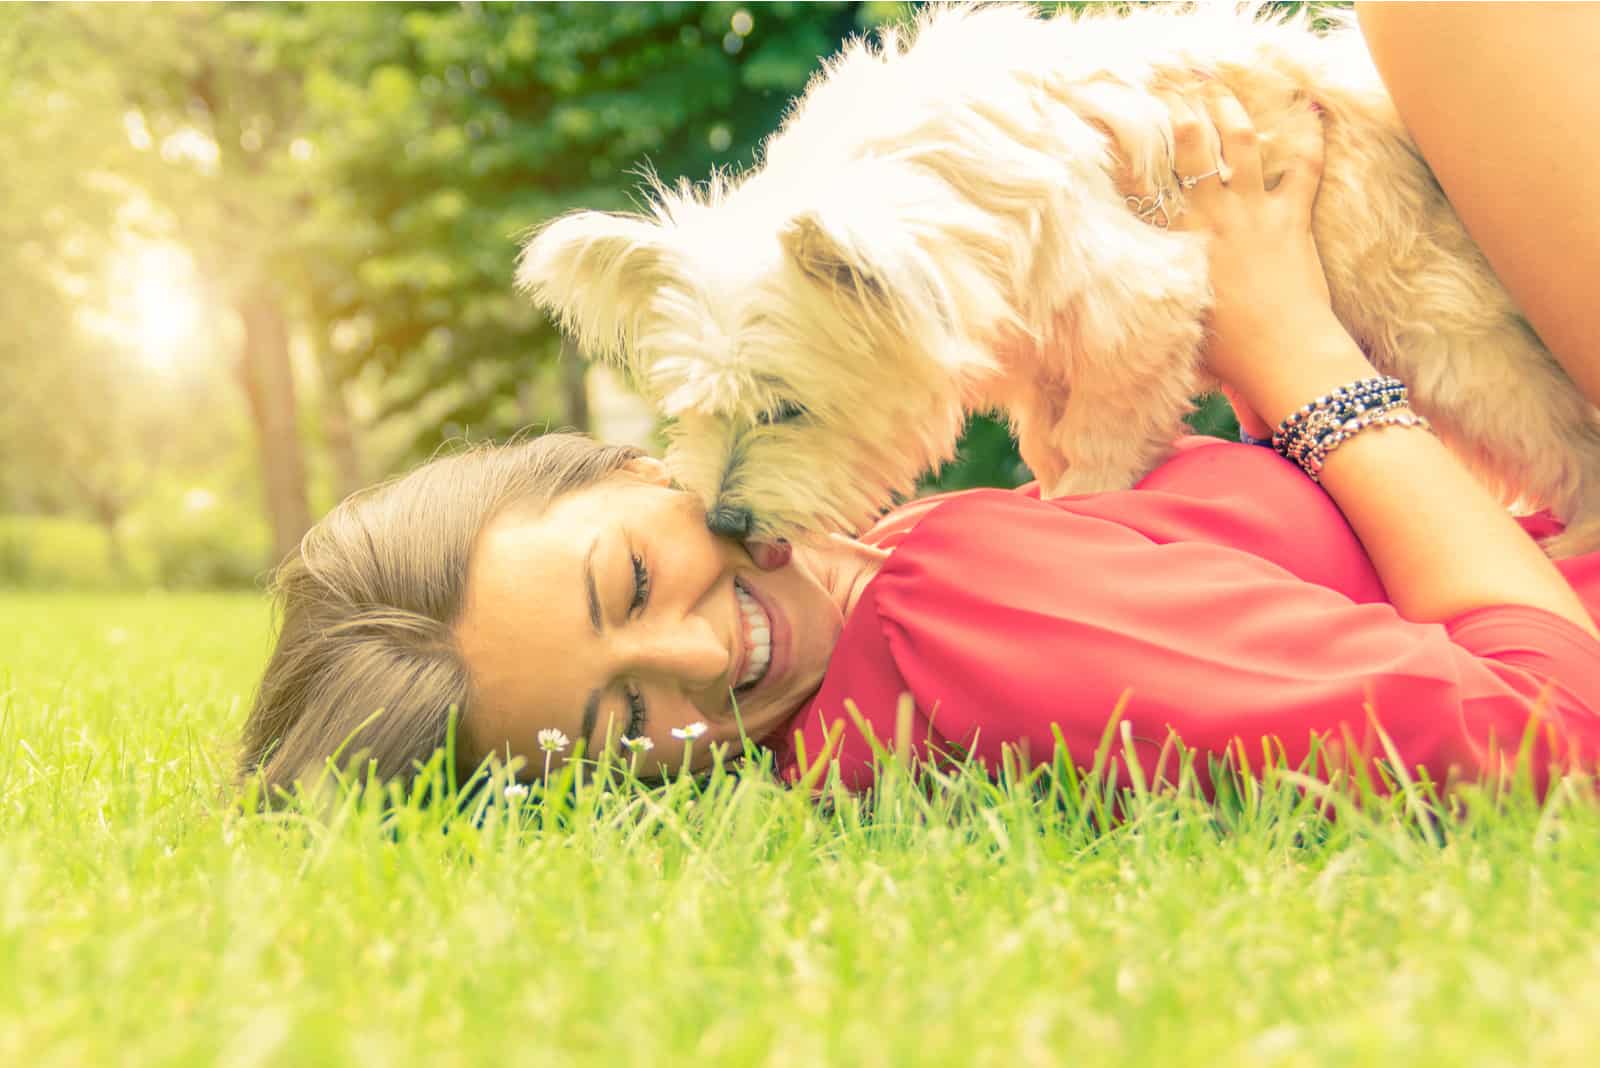 Why Does My Dog Lick Me? 9 Reasons For This Behavior